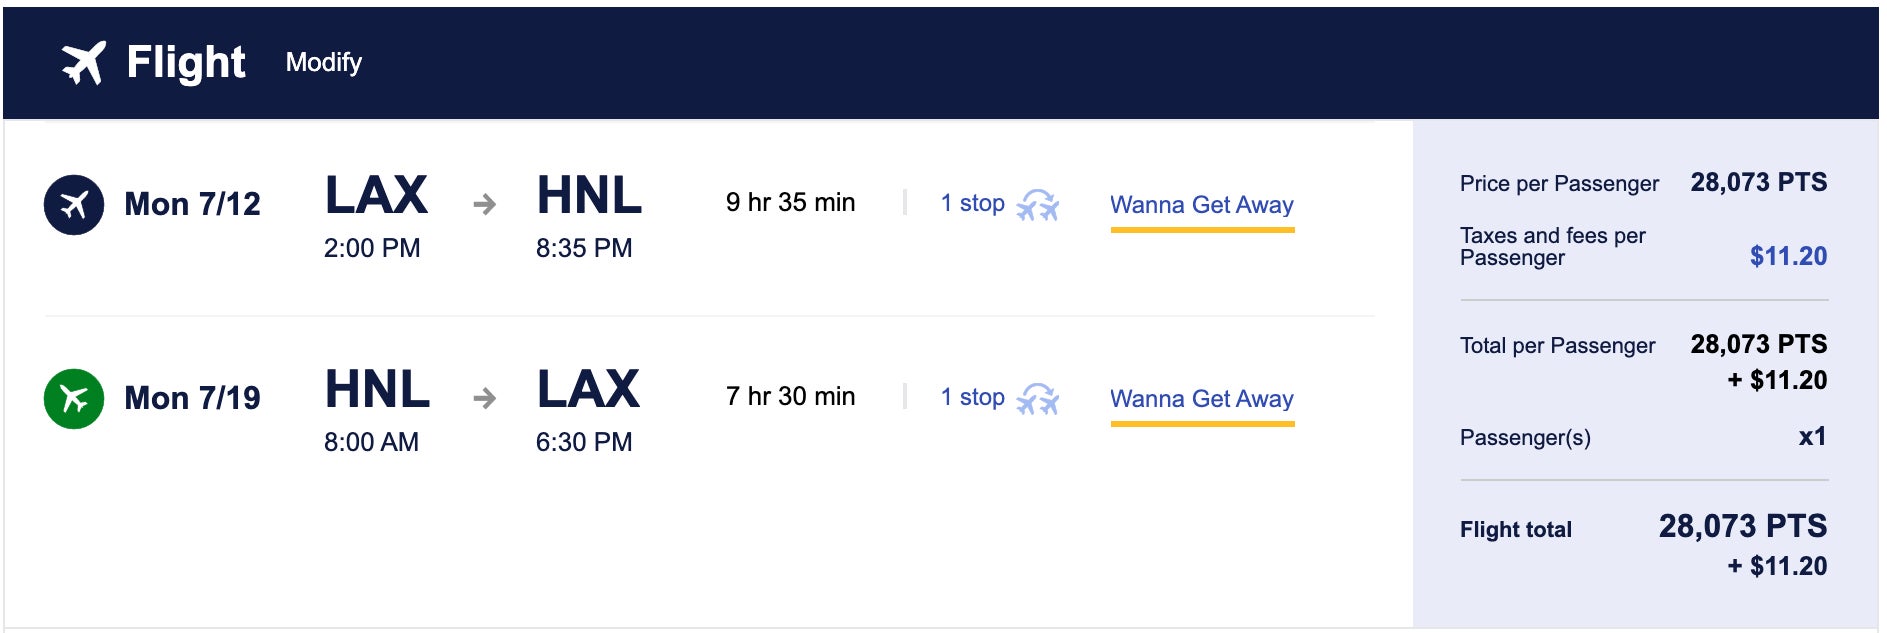 Pdx To Honolulu Round Trip August Deals - Does Southwest Airlines Offer Black Friday Deals